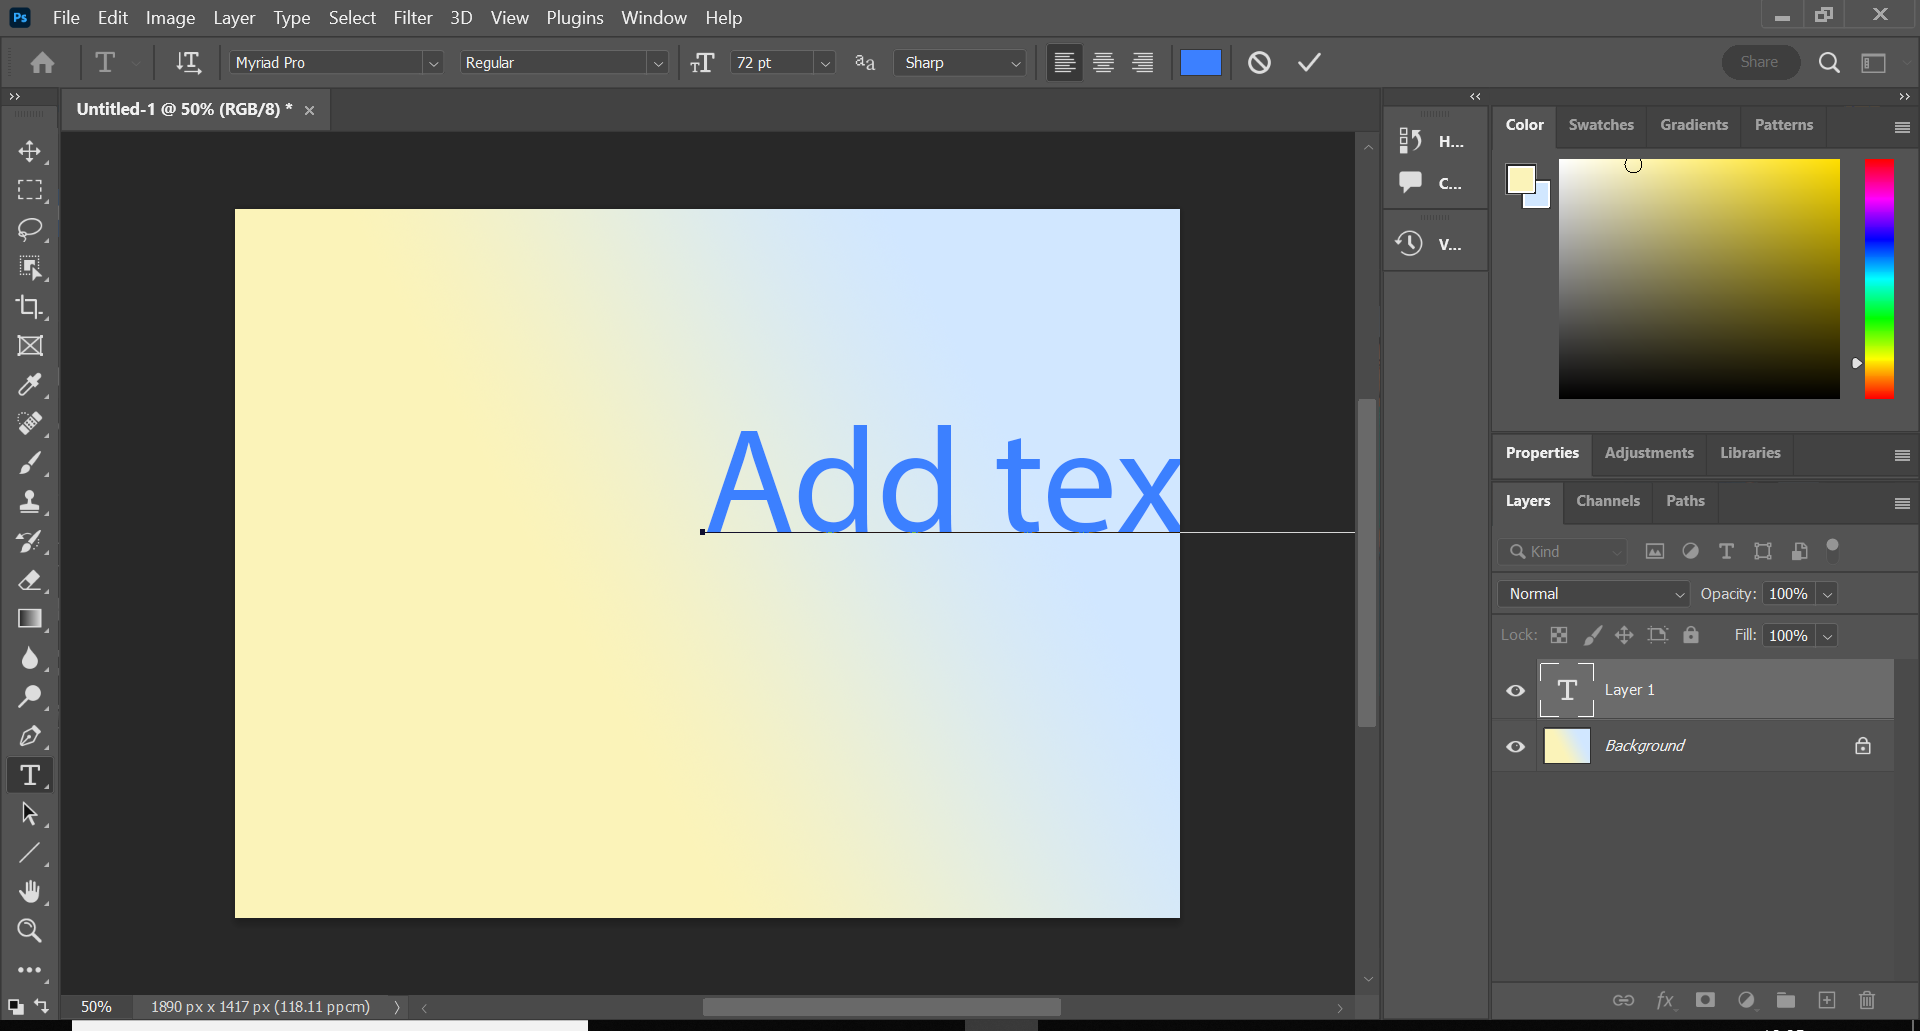 How to add text in Photoshop